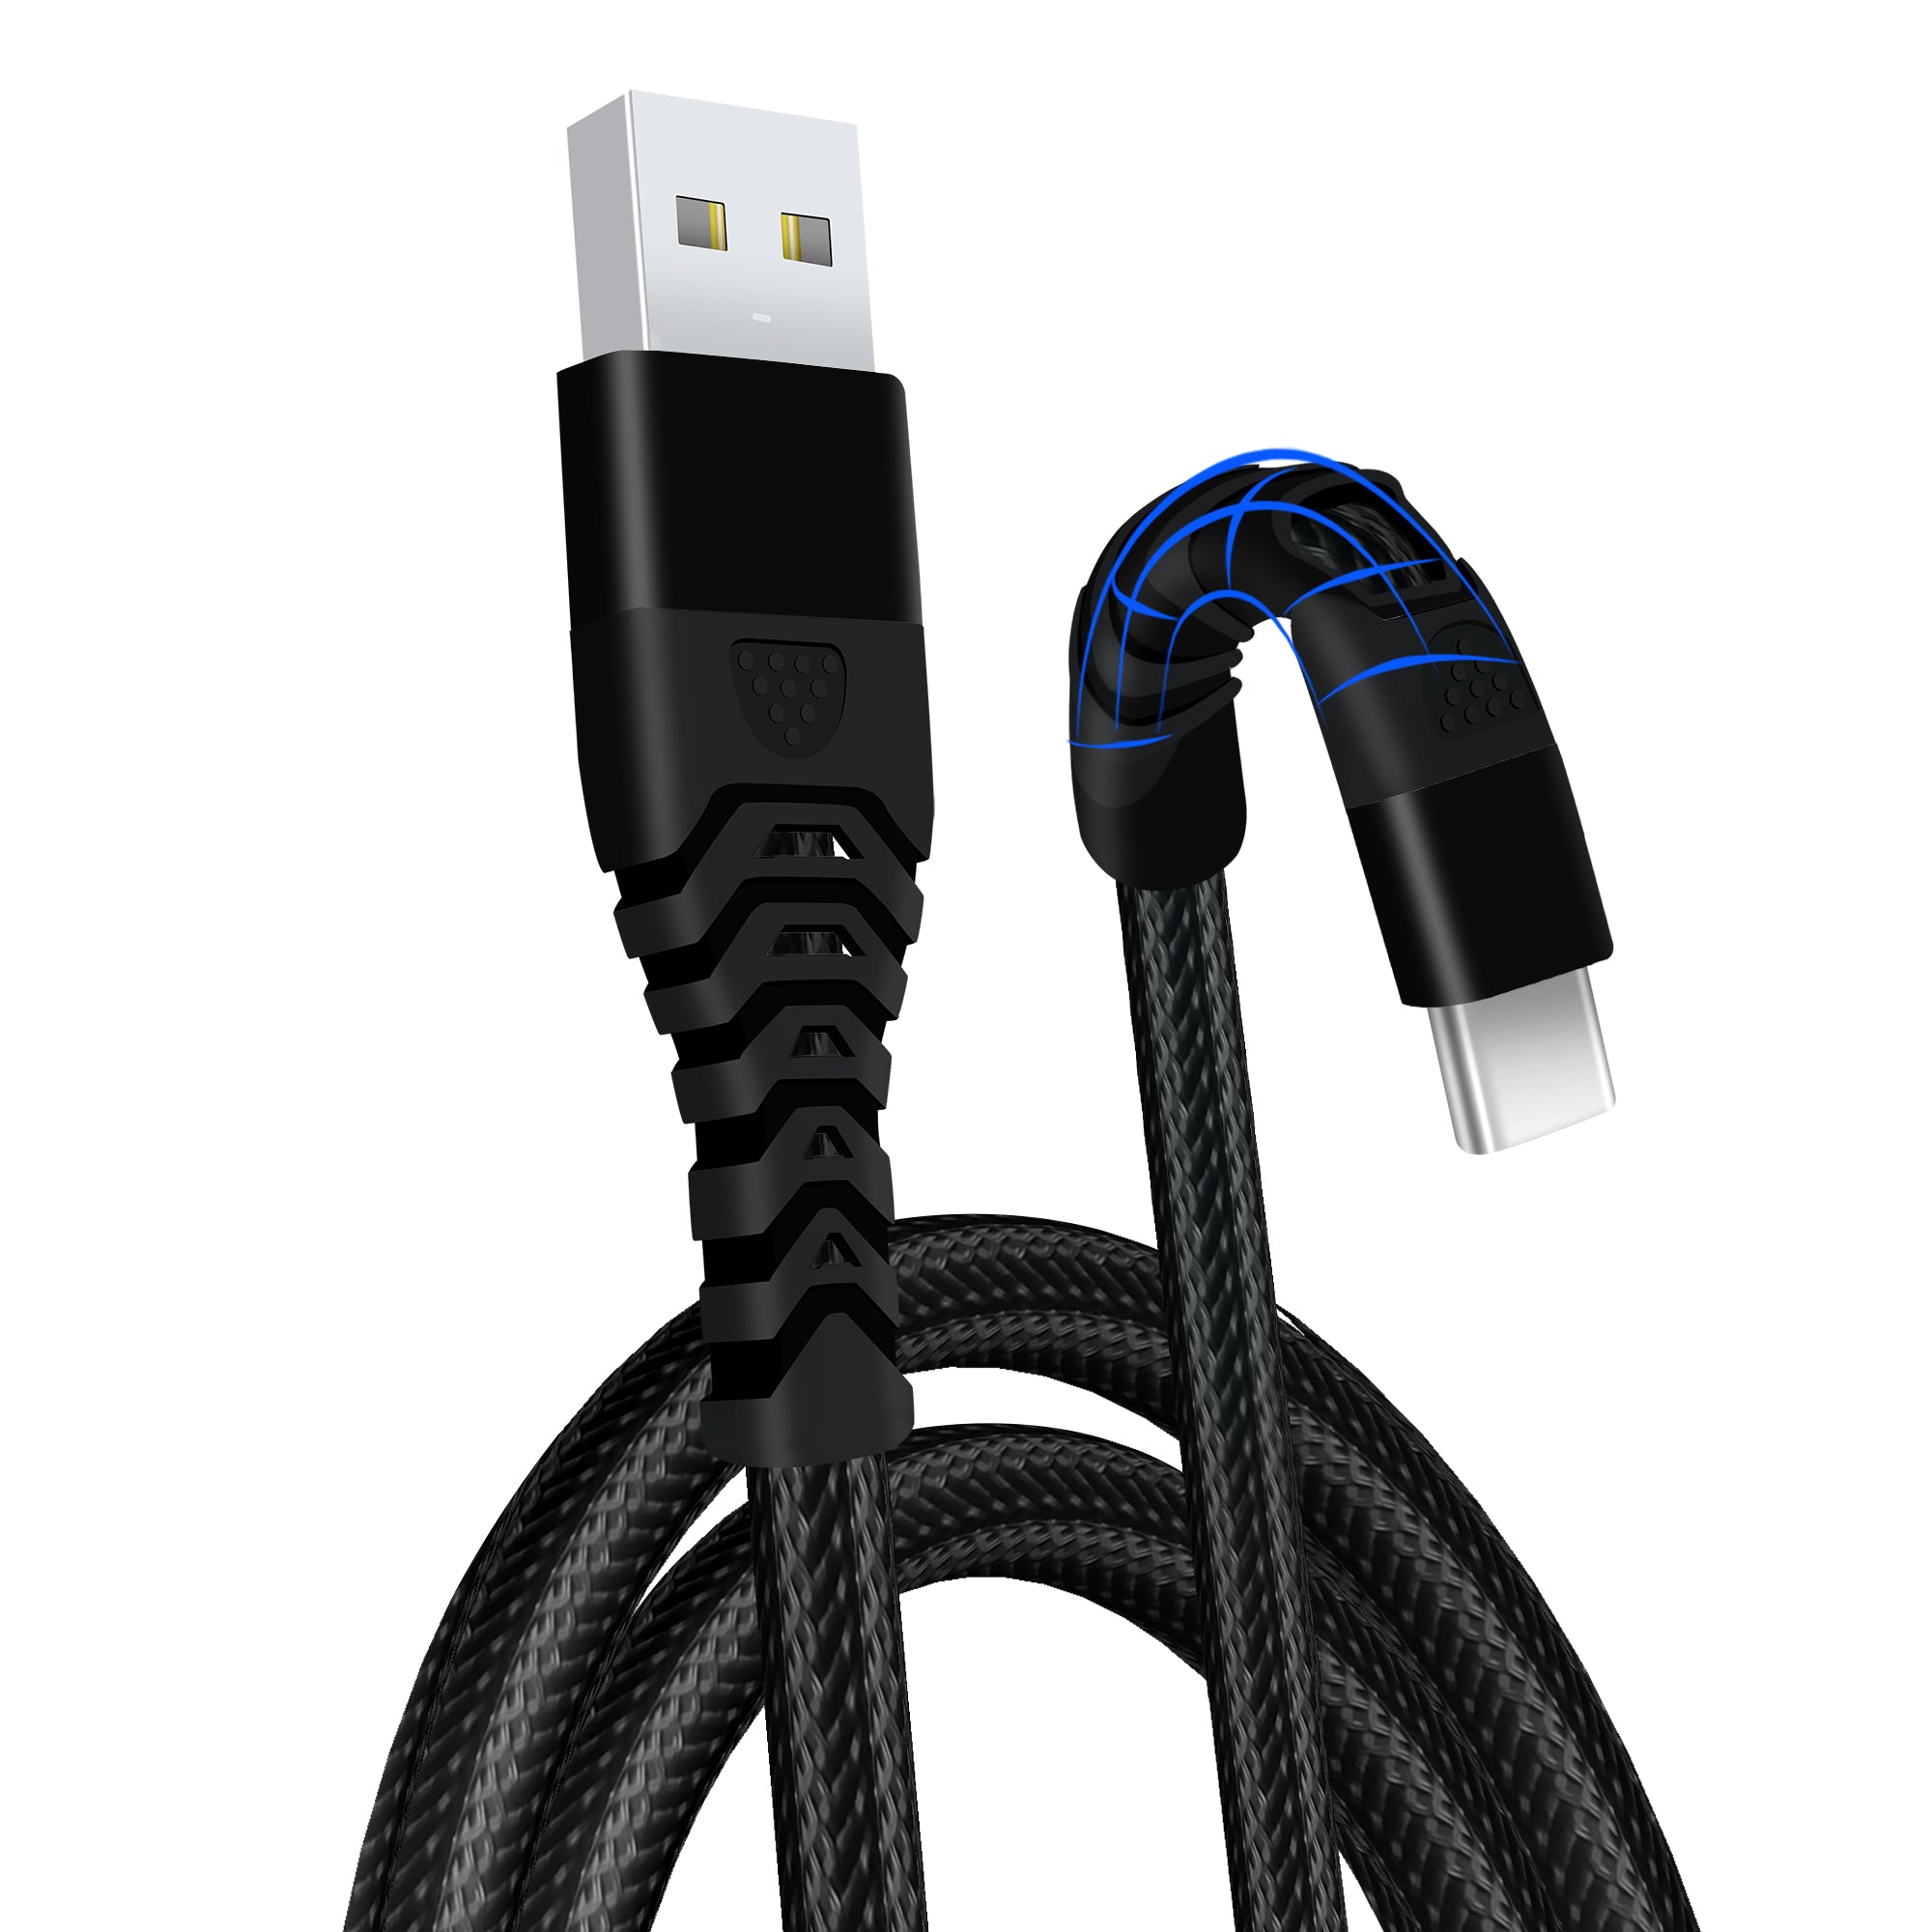 3.0A USB C Cable to USB 2.0 Braided USB Type C Charging Cable